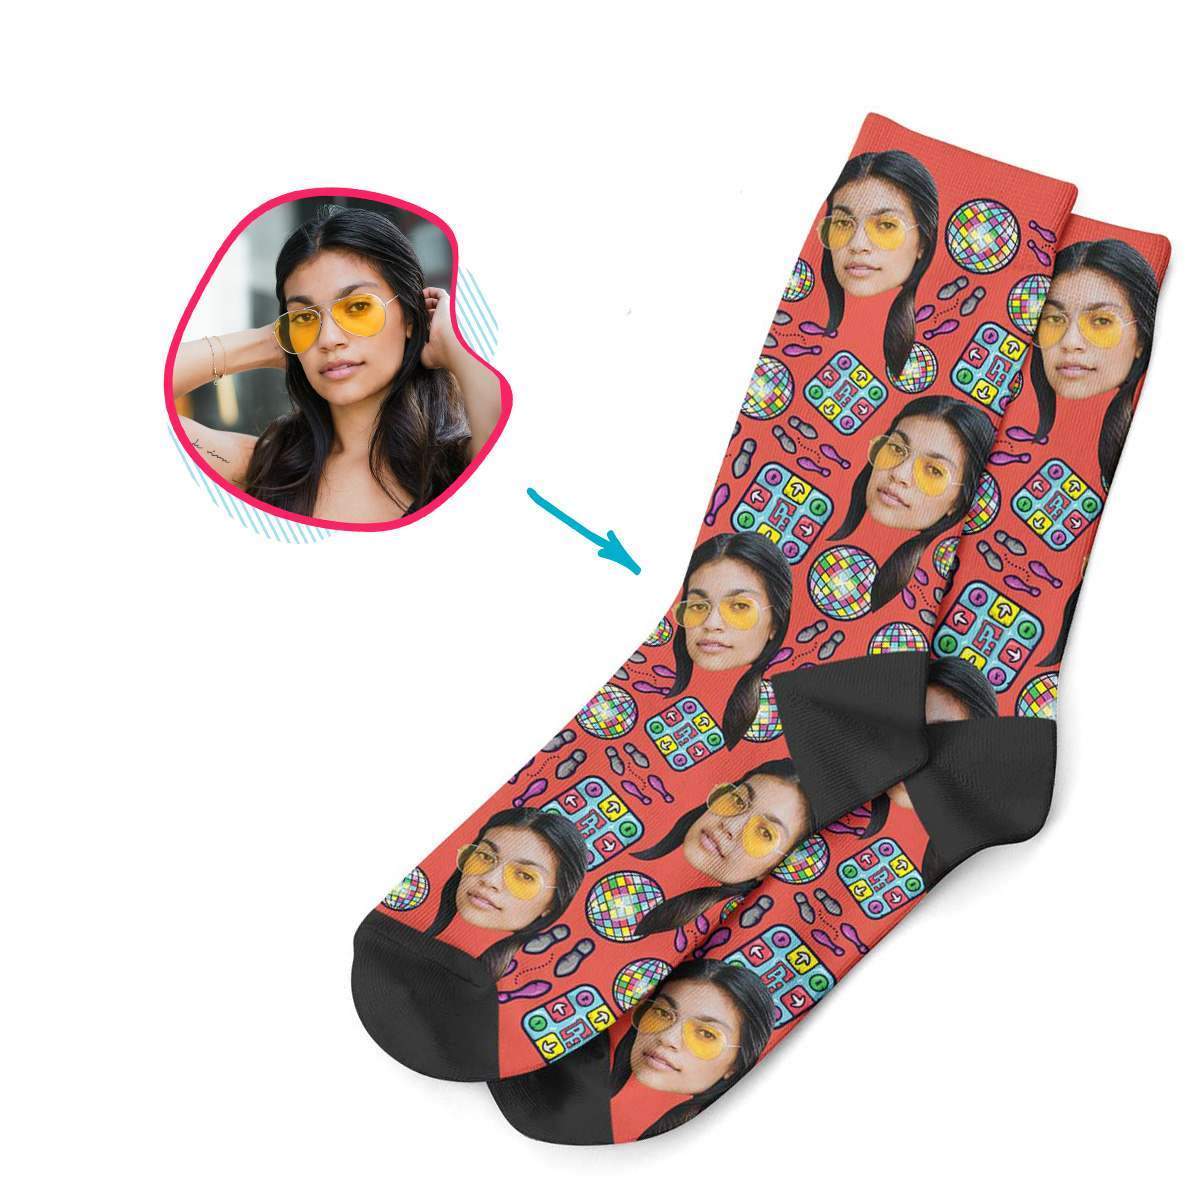 red Dancing socks personalized with photo of face printed on them